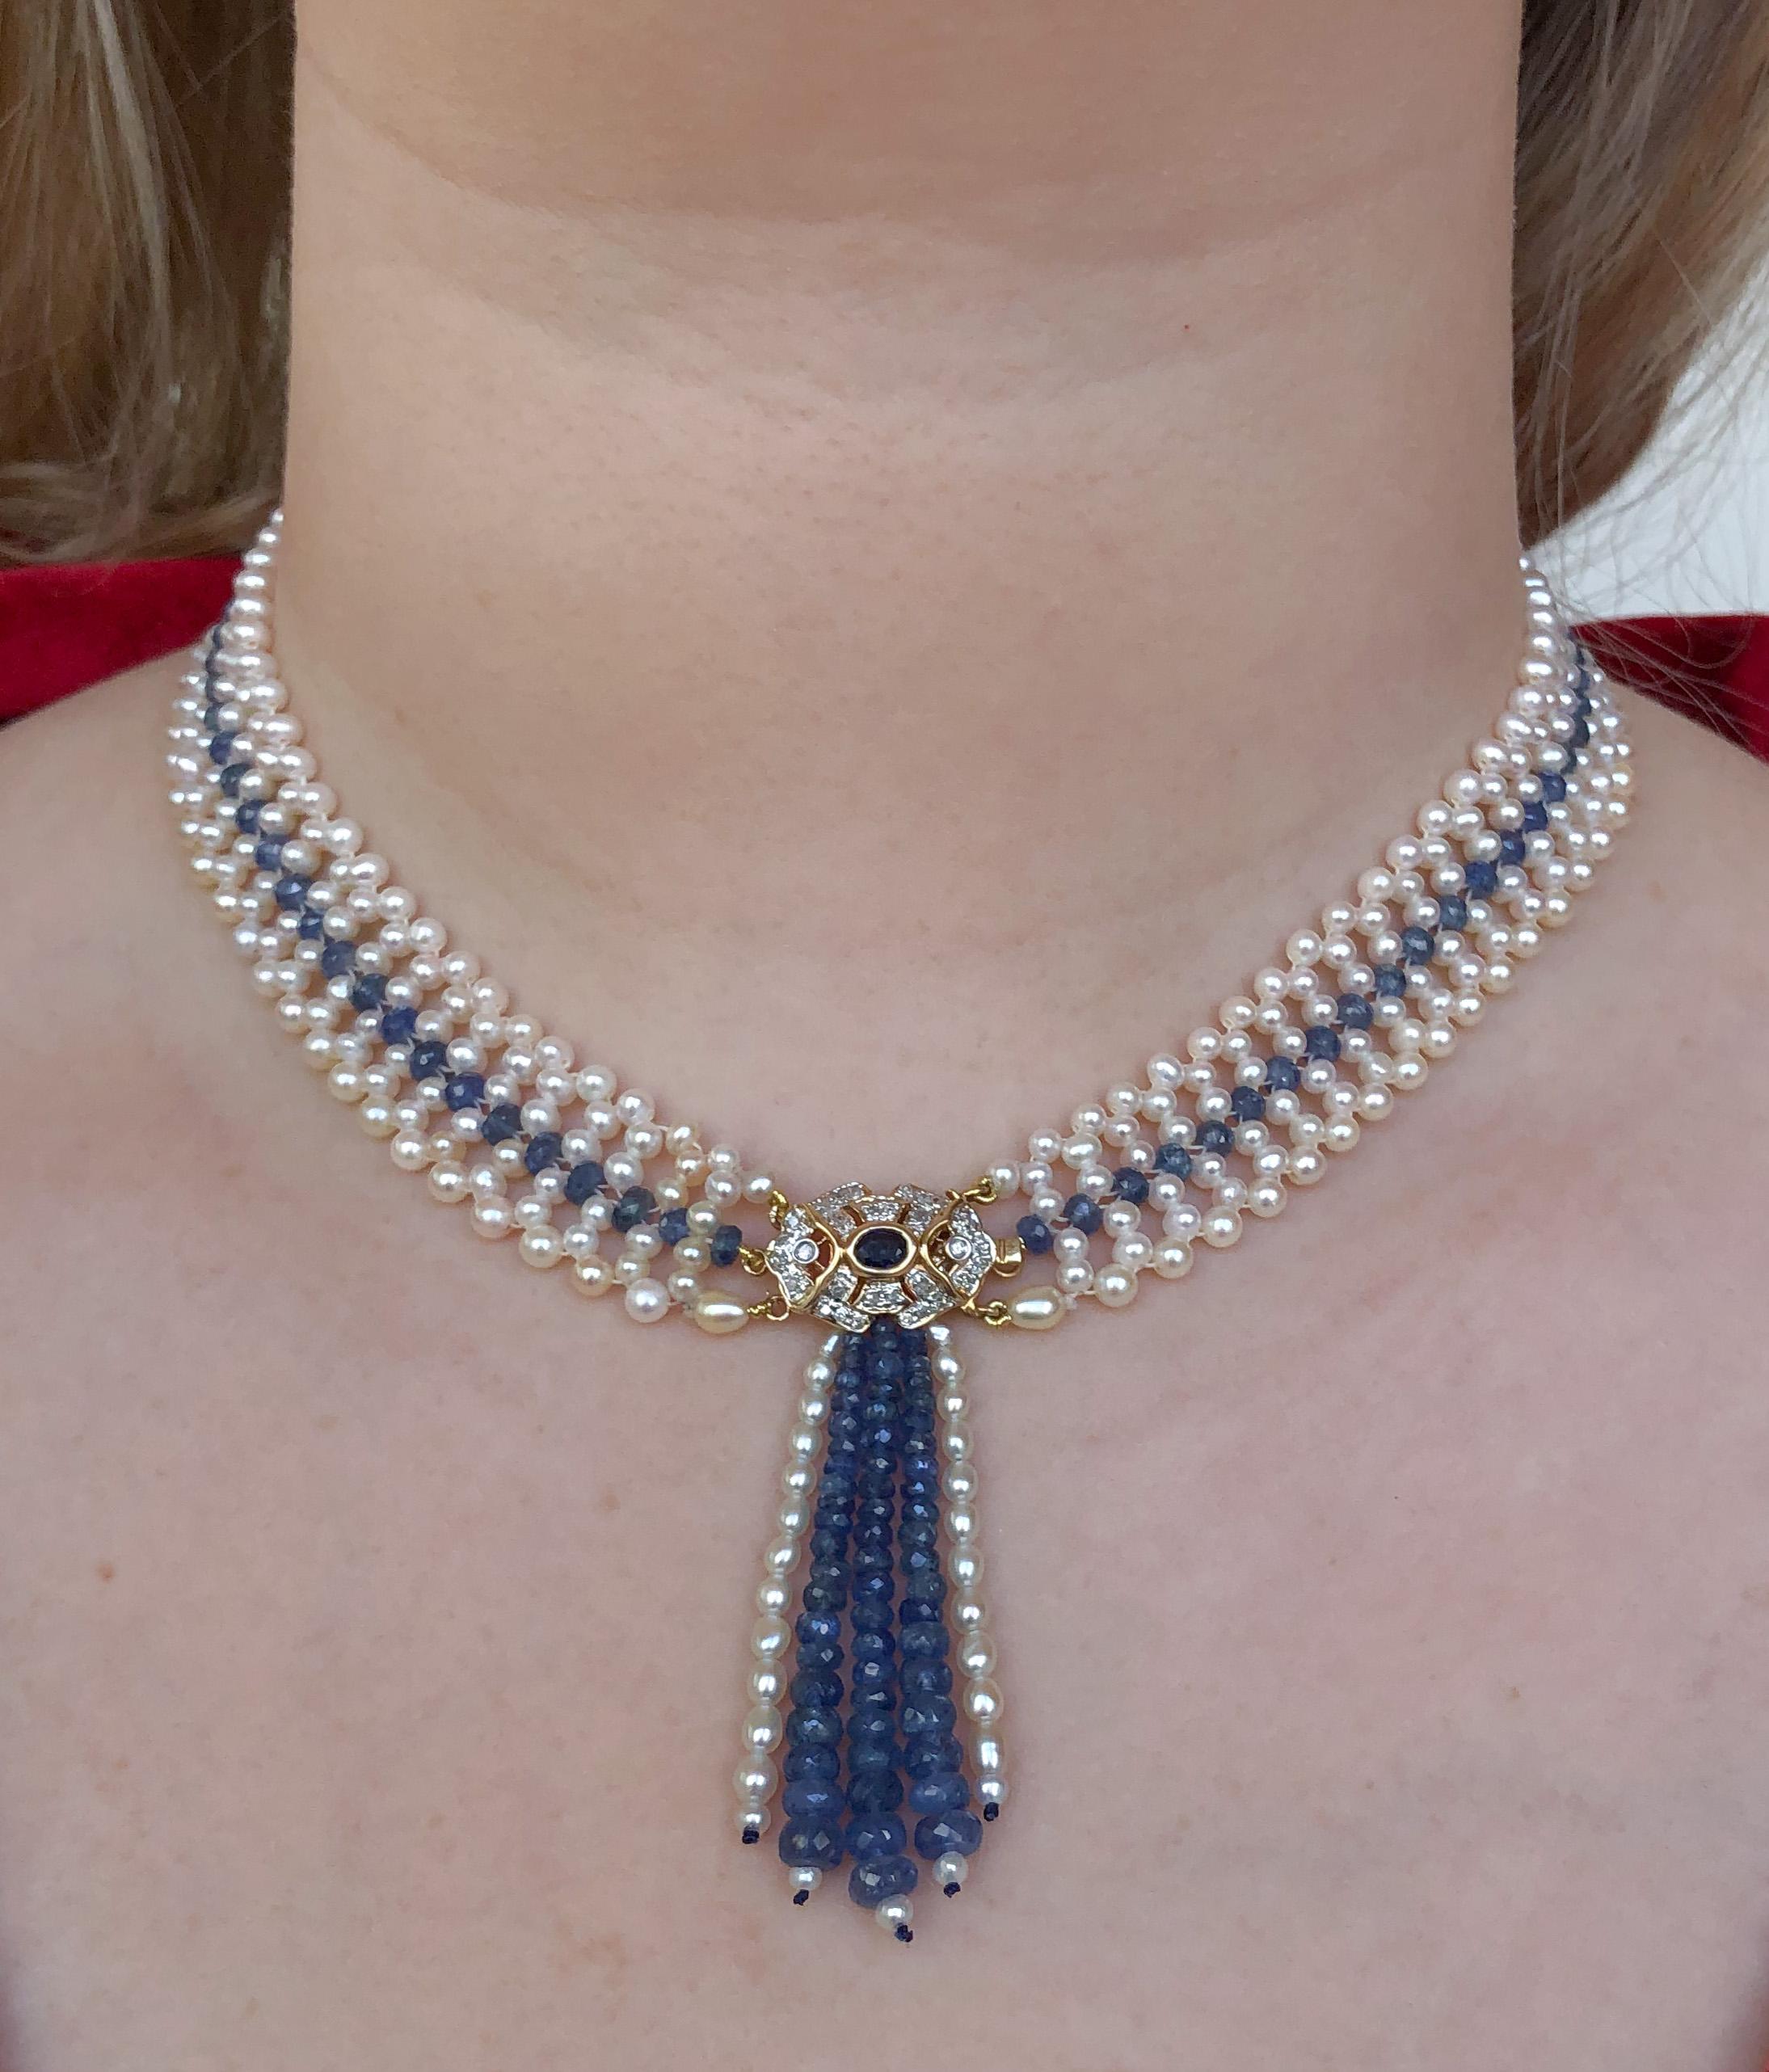 Women's Marina J. Woven Pearl and Sapphire Necklace with Diamond Centerpiece & 14K Gold